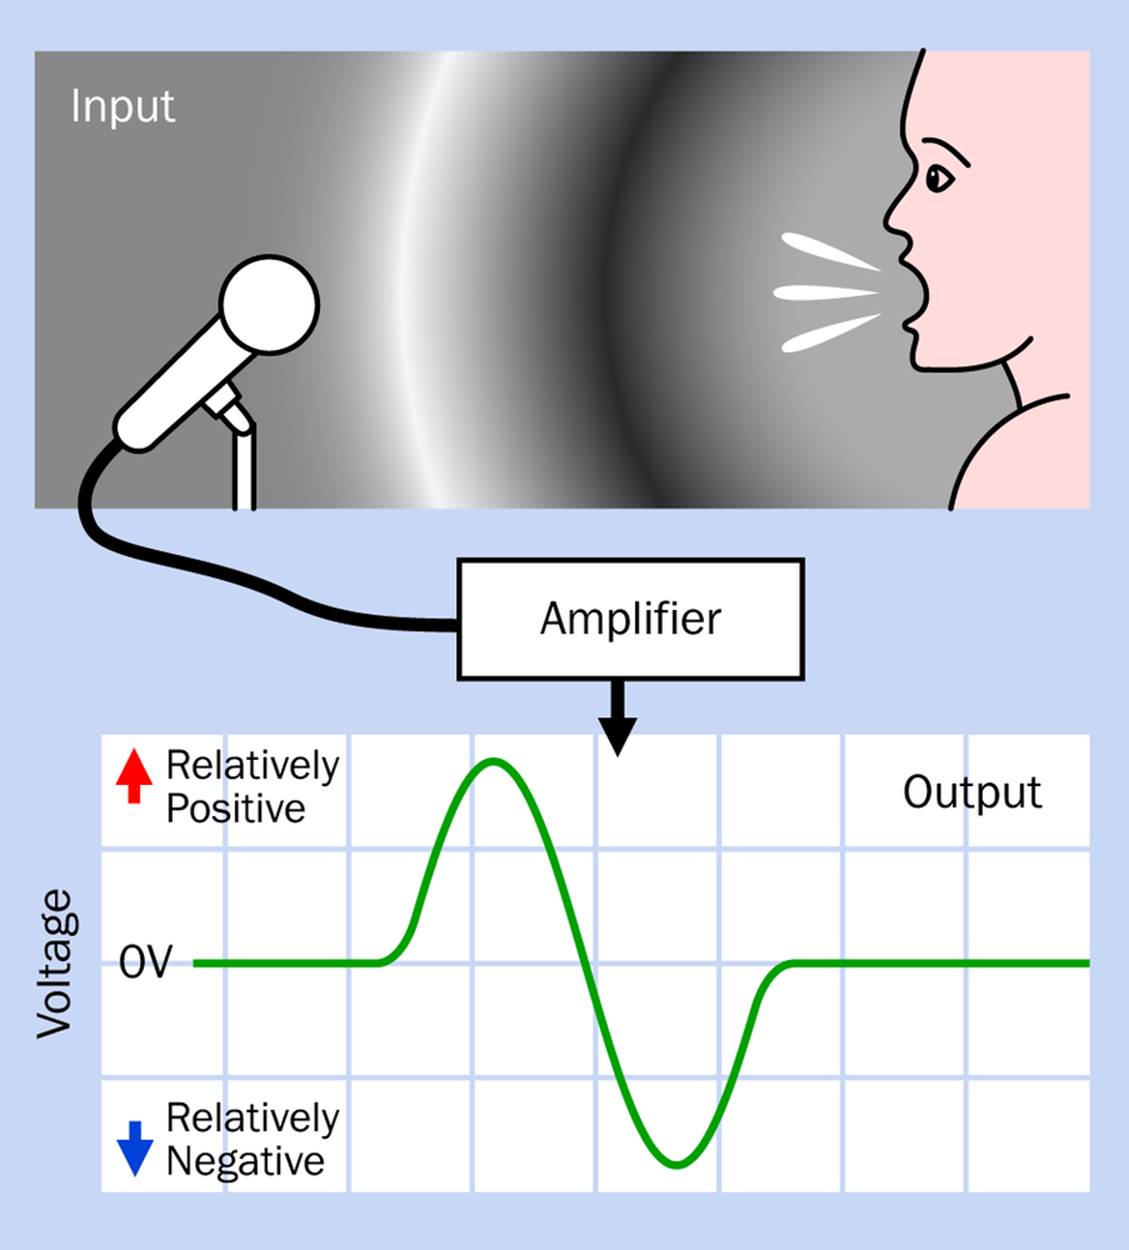 A good amplifier will create an output in which the variation in voltage matches the variation in pressure created by the sound input.